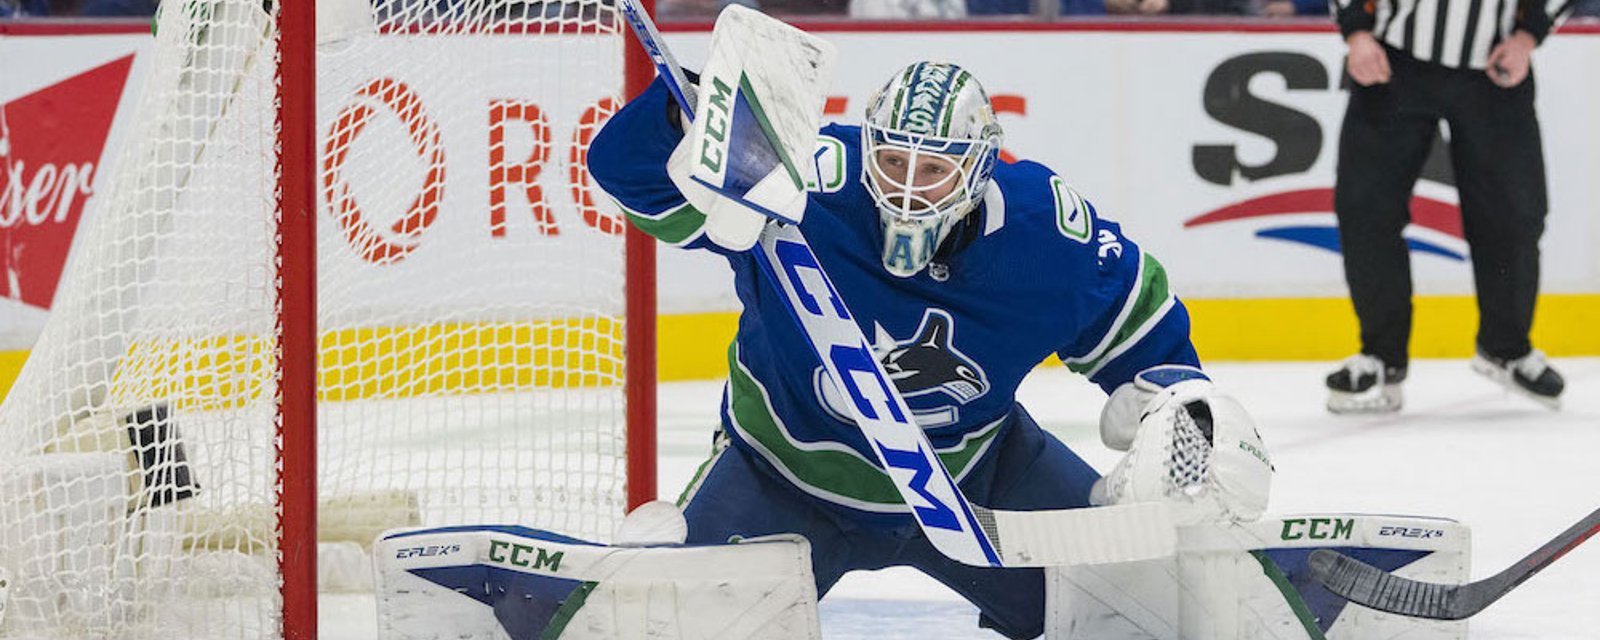 Demko out for Game 2, possibly the entire 1st round